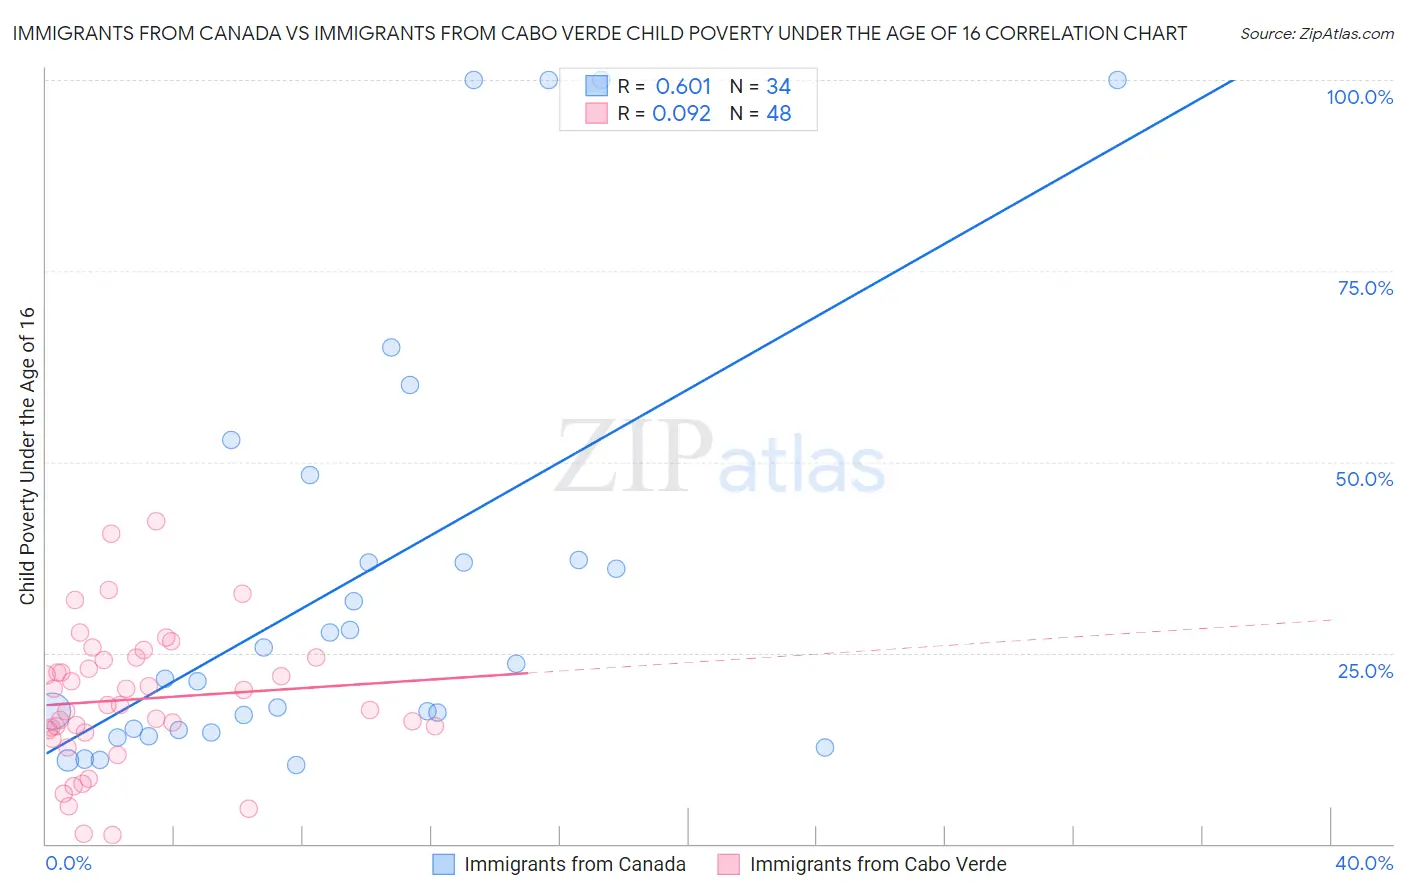 Immigrants from Canada vs Immigrants from Cabo Verde Child Poverty Under the Age of 16